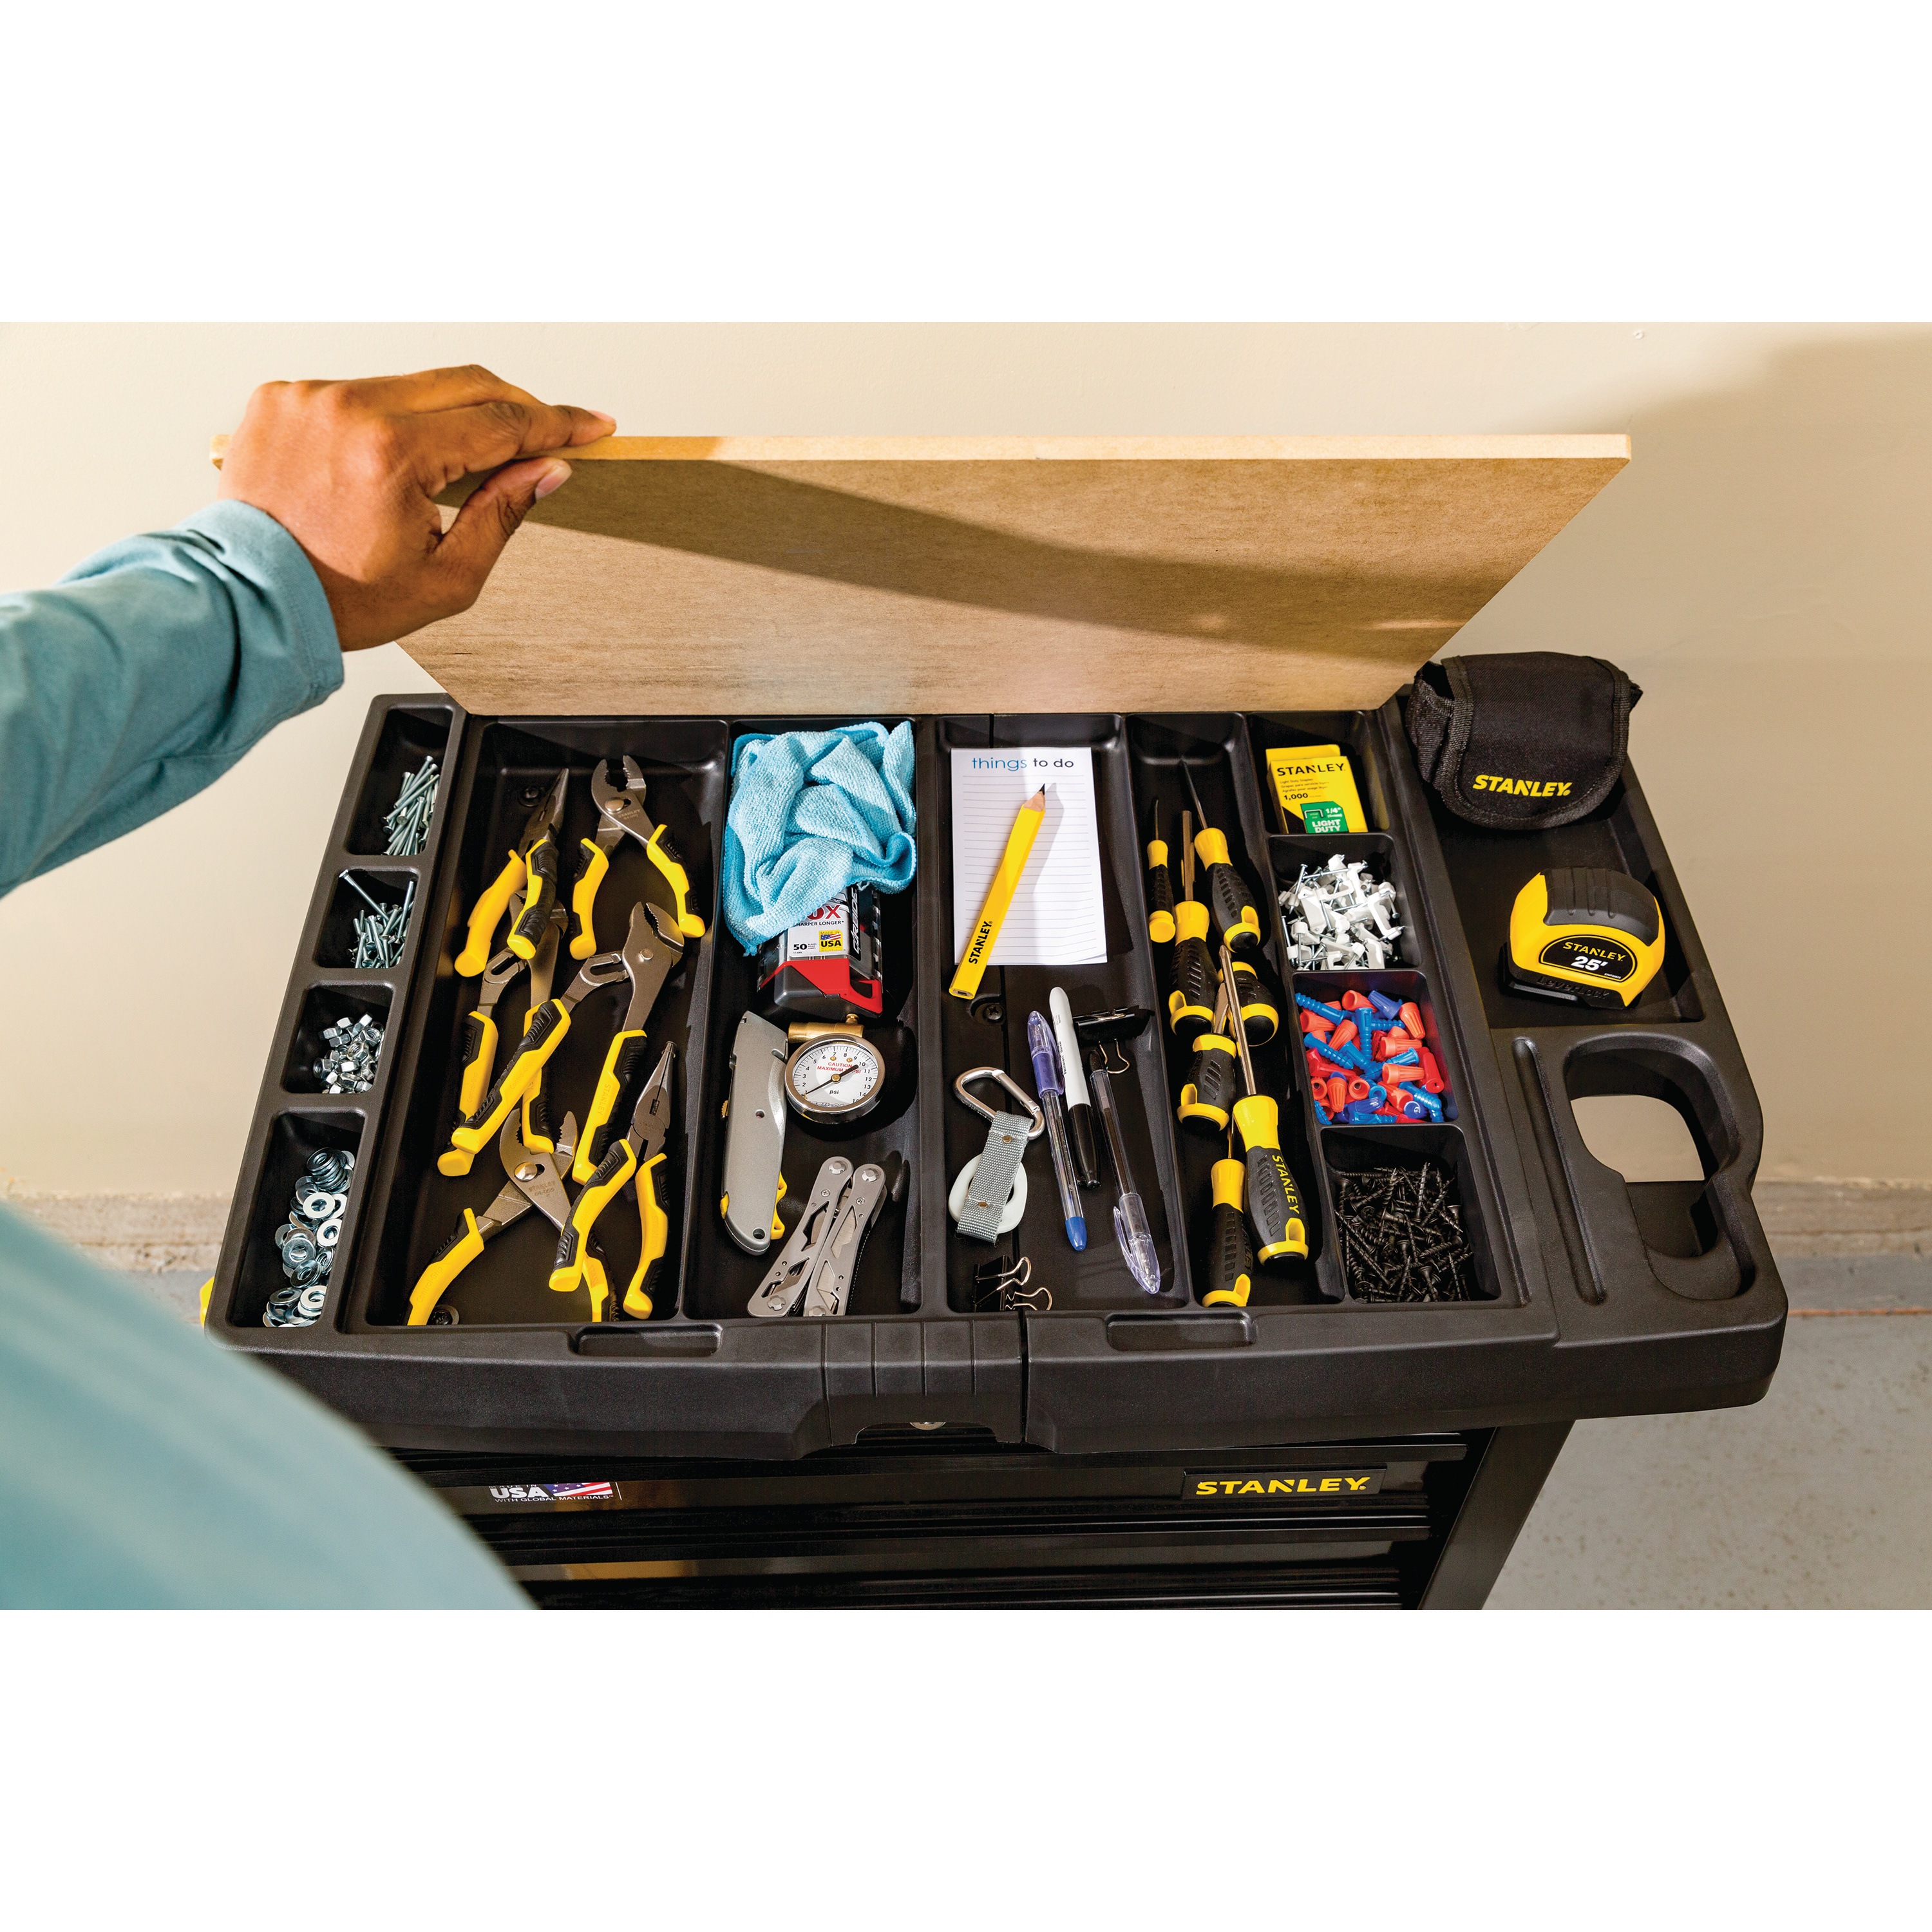 Stanley Tools - 100 Series 31 in W 5Drawer Mobile Workbench - STST23151BK